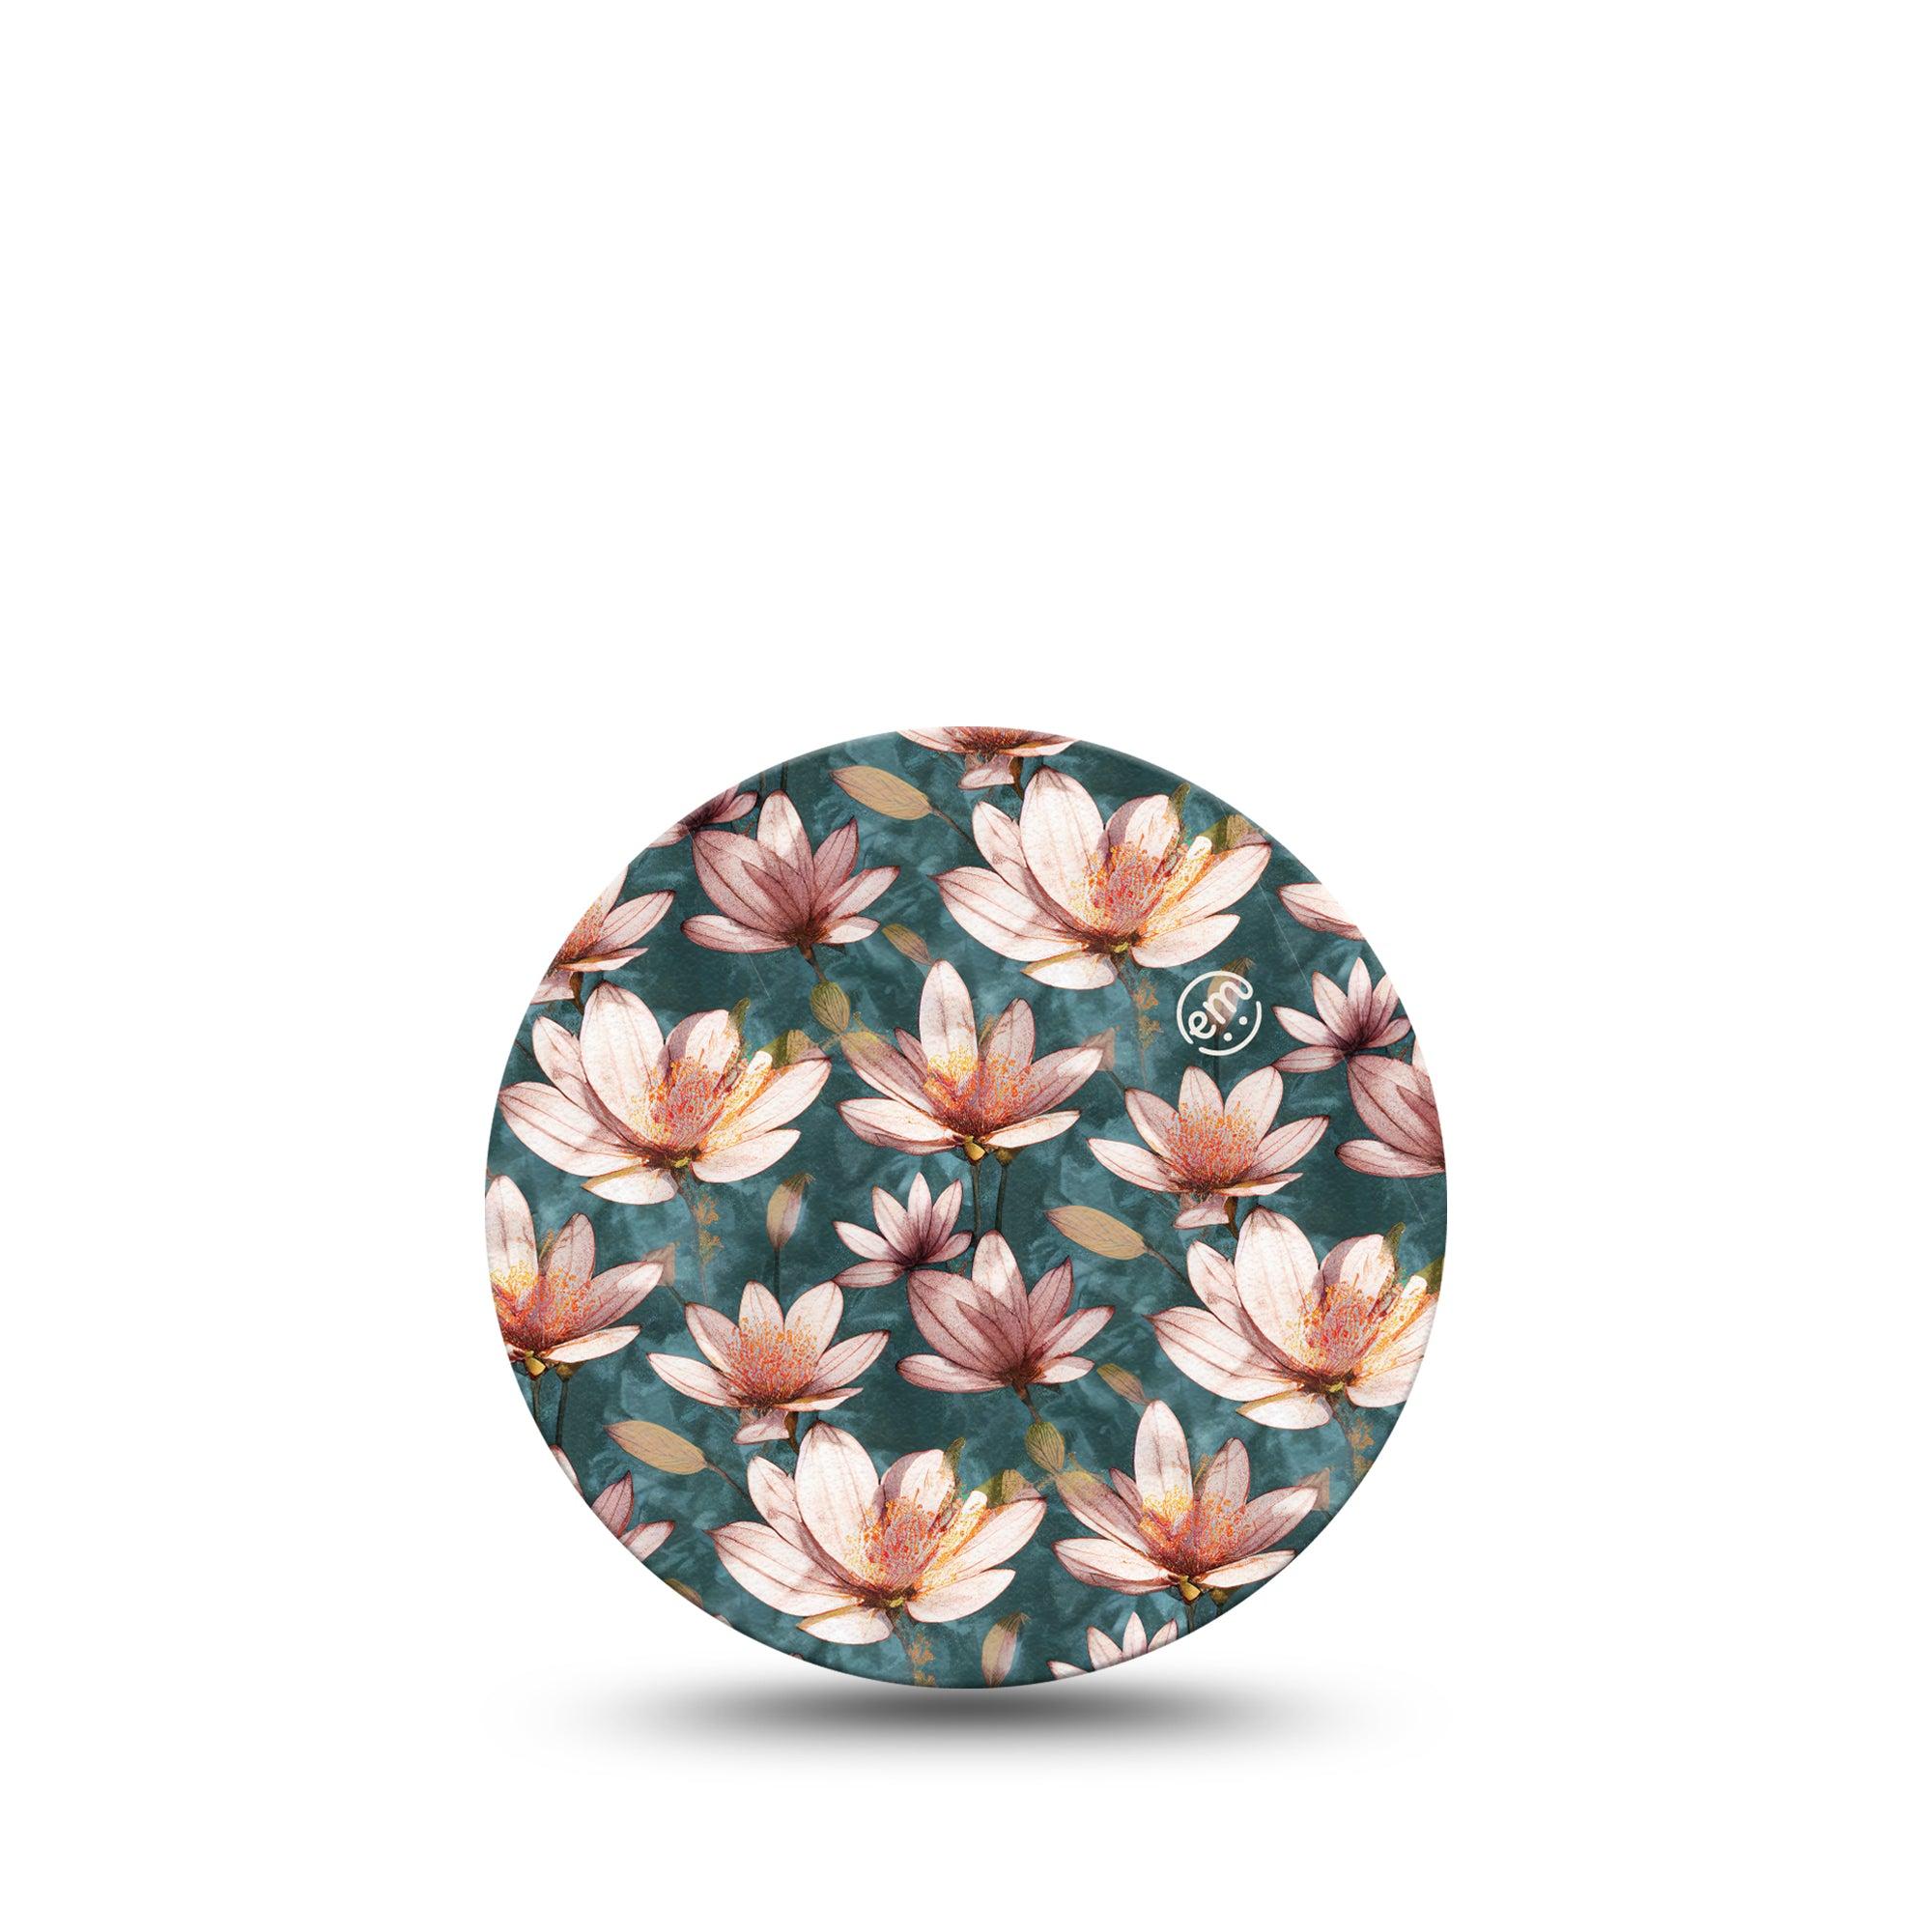 ExpressionMed Magnolia Libre 3 Overpatch, Single, Fragrant Petals Themed, CGM Plaster Tape Design